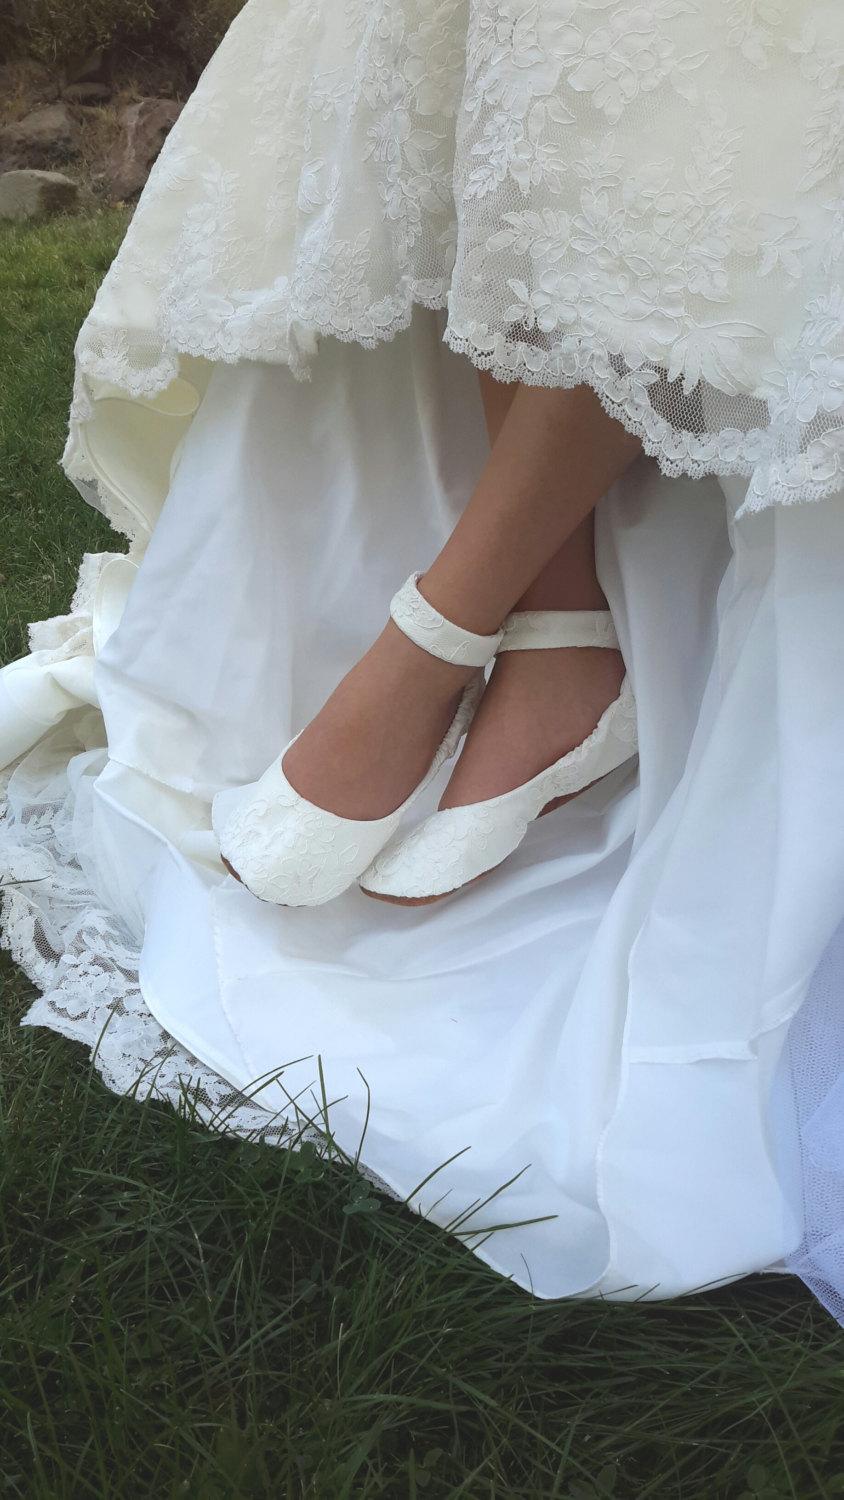 Wedding - Lace Wedding Shoes with Ankle Strap, Flat Wedding  Shoe, Lace Wedding Shoe, Lace  Bridal Flat Shoe, Bridal Flat Shoe, Ivory Bridal Flat